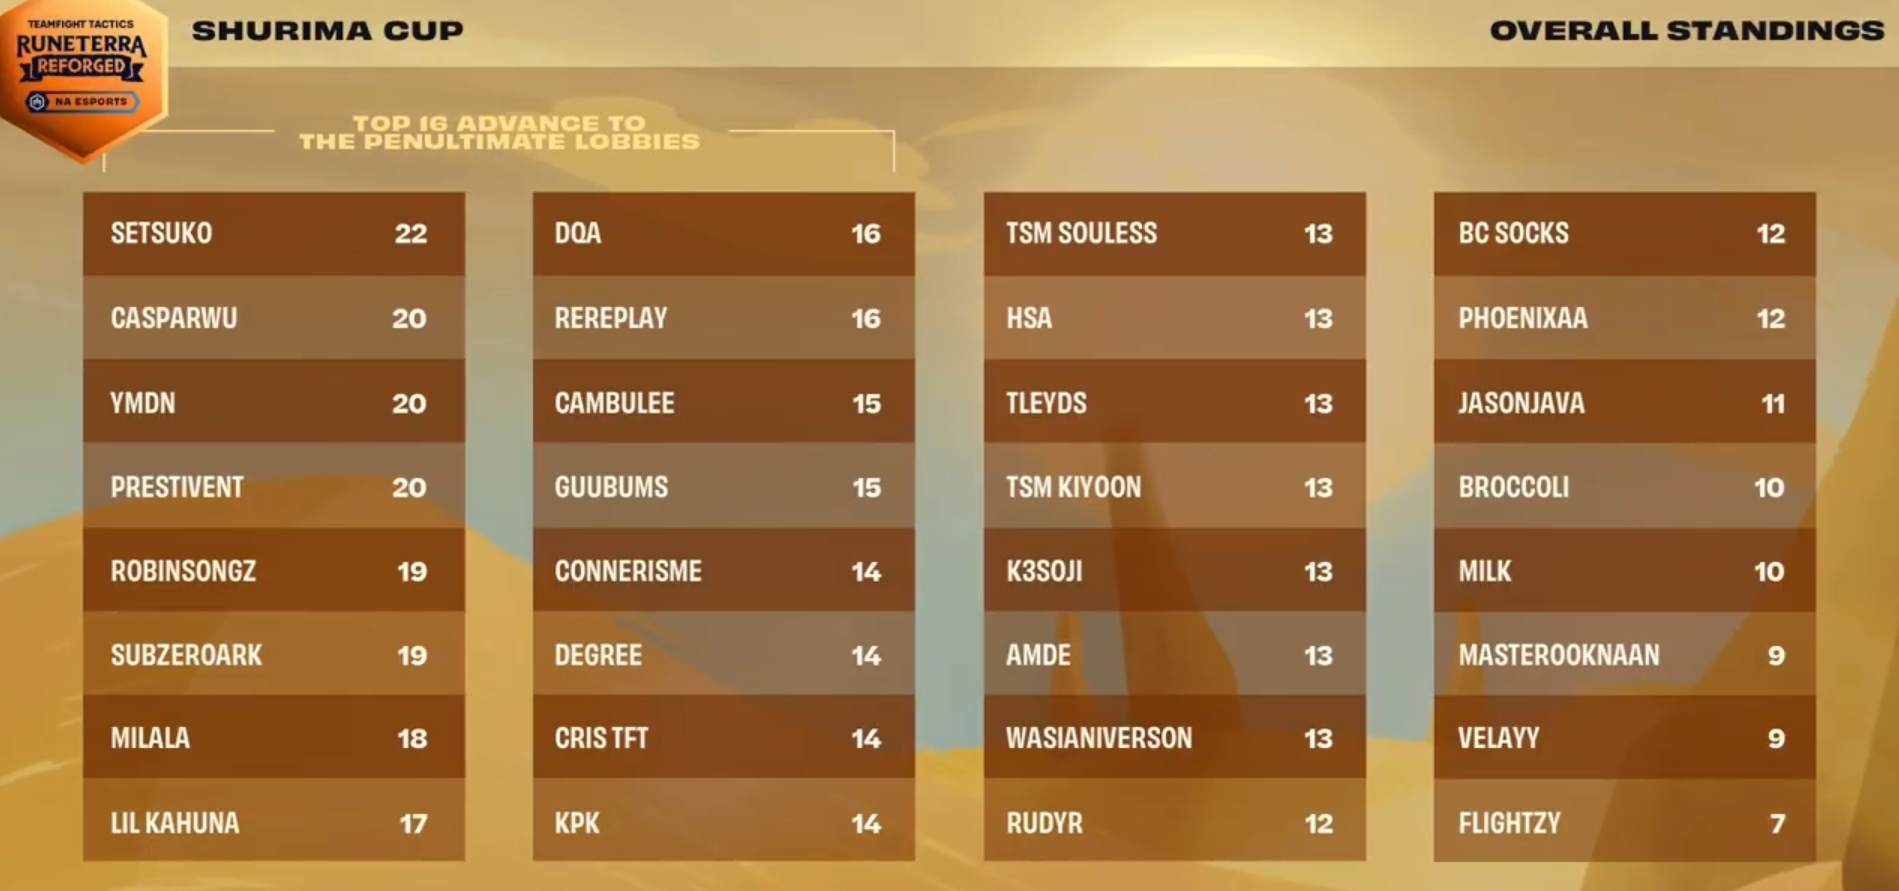 Image of Shurima Cup standings after three games